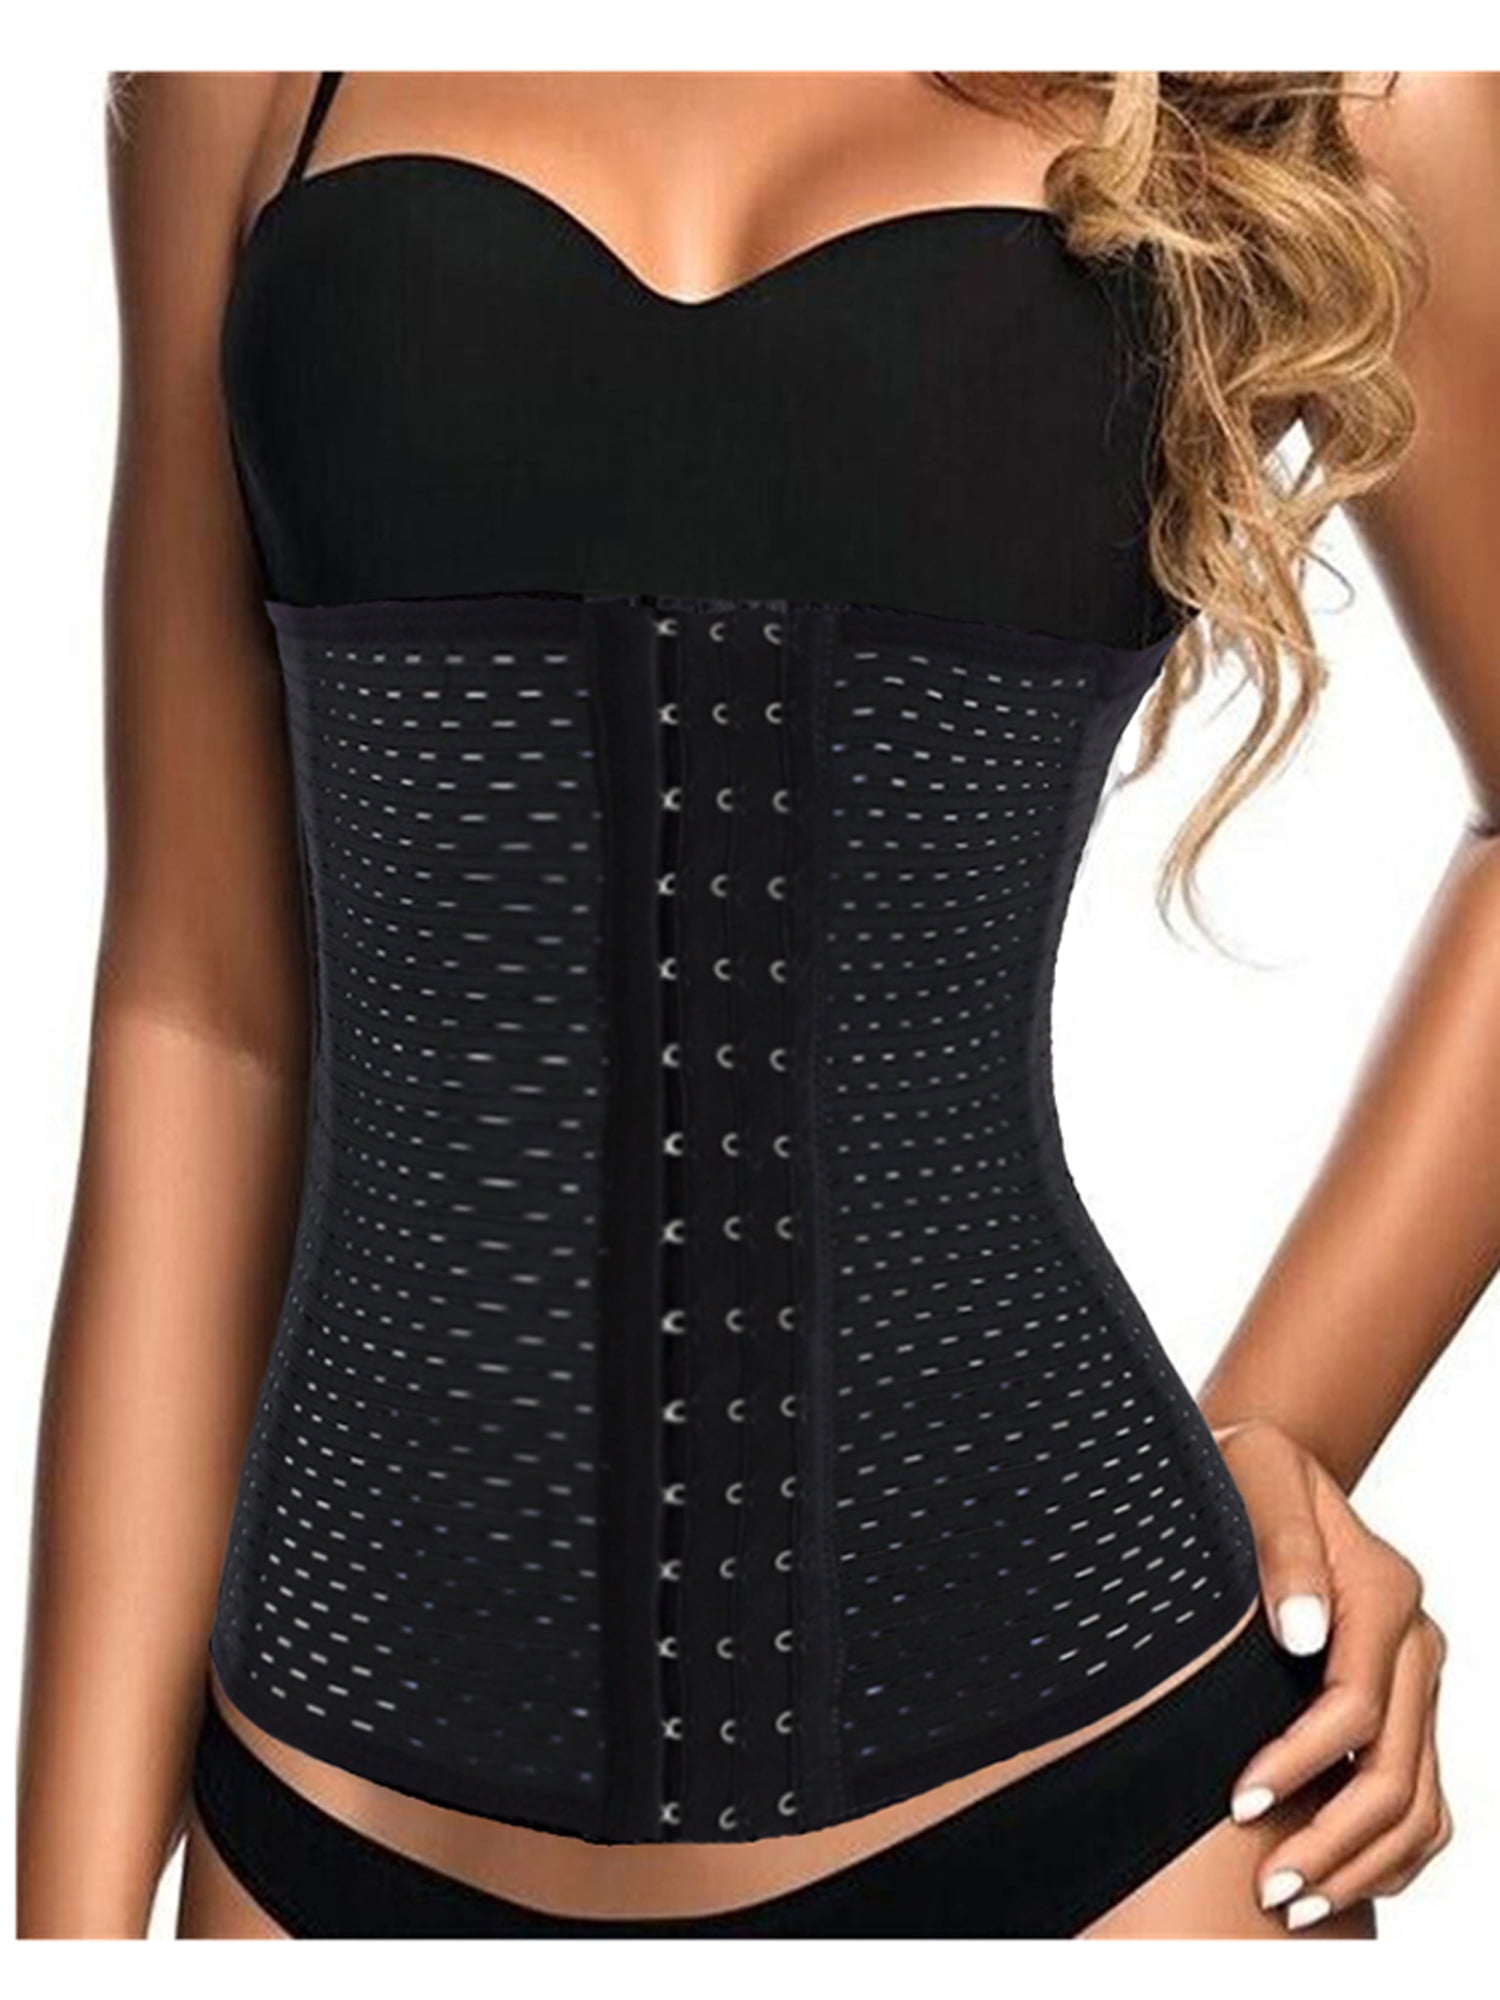 Youloveit Aist Trainer Corset Breathable And Invisible Waist Shaper  Training Waist Tightener For Female Abdominal Control Slimming And Shaping  Belly Control Plus Size 